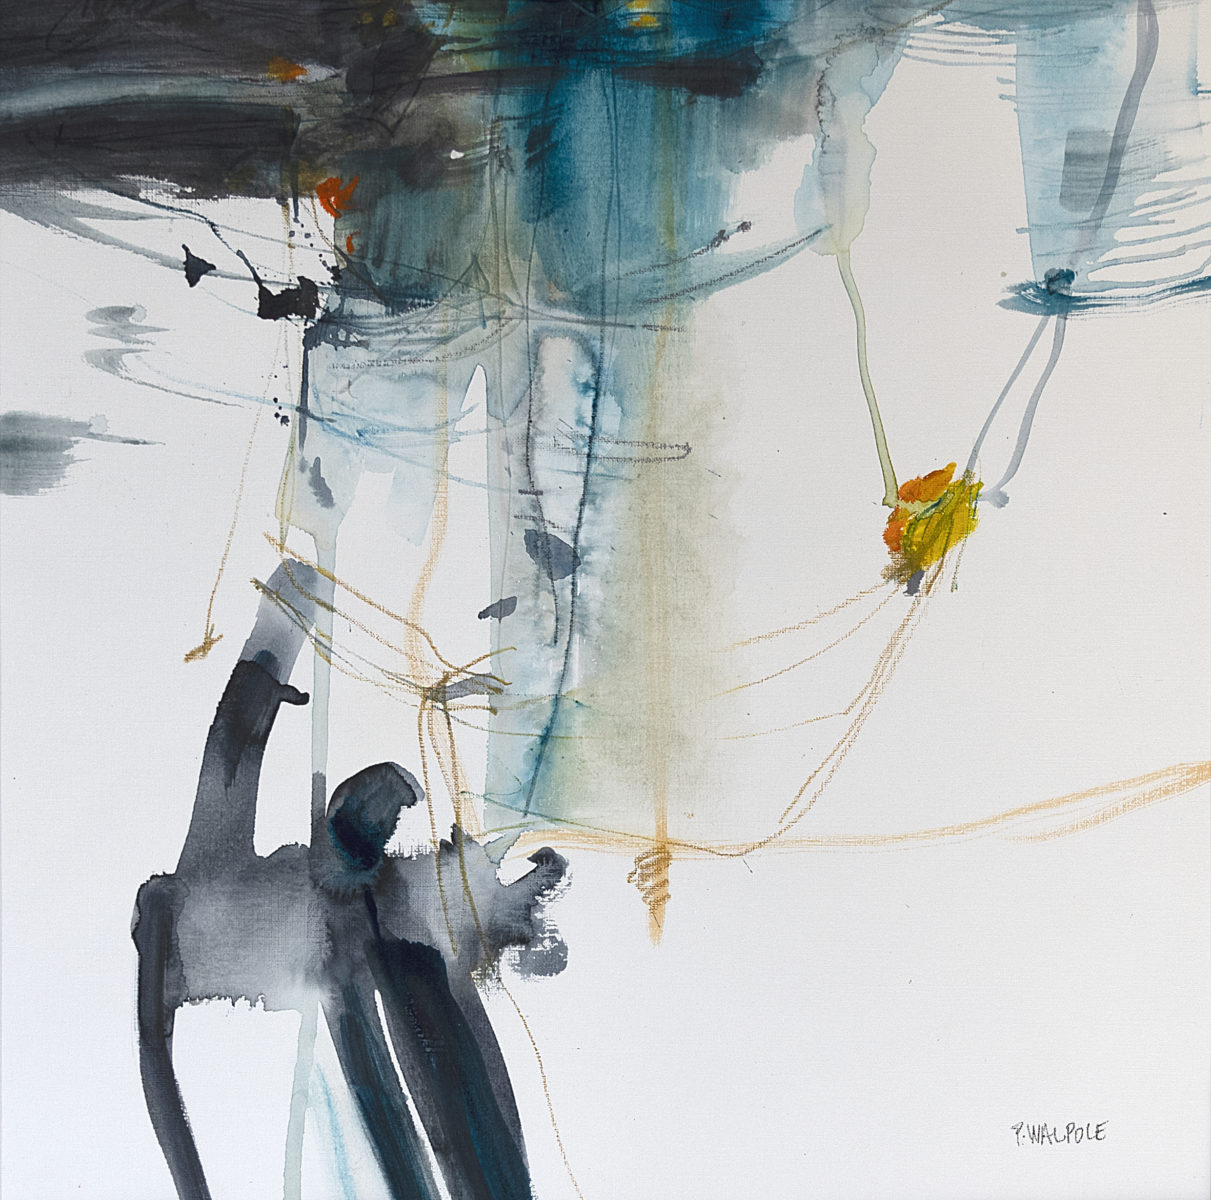 Where dragonflies flit | Pam Walpole | Mixed media on paper | 80 x 80 cm, framed in white | $1500